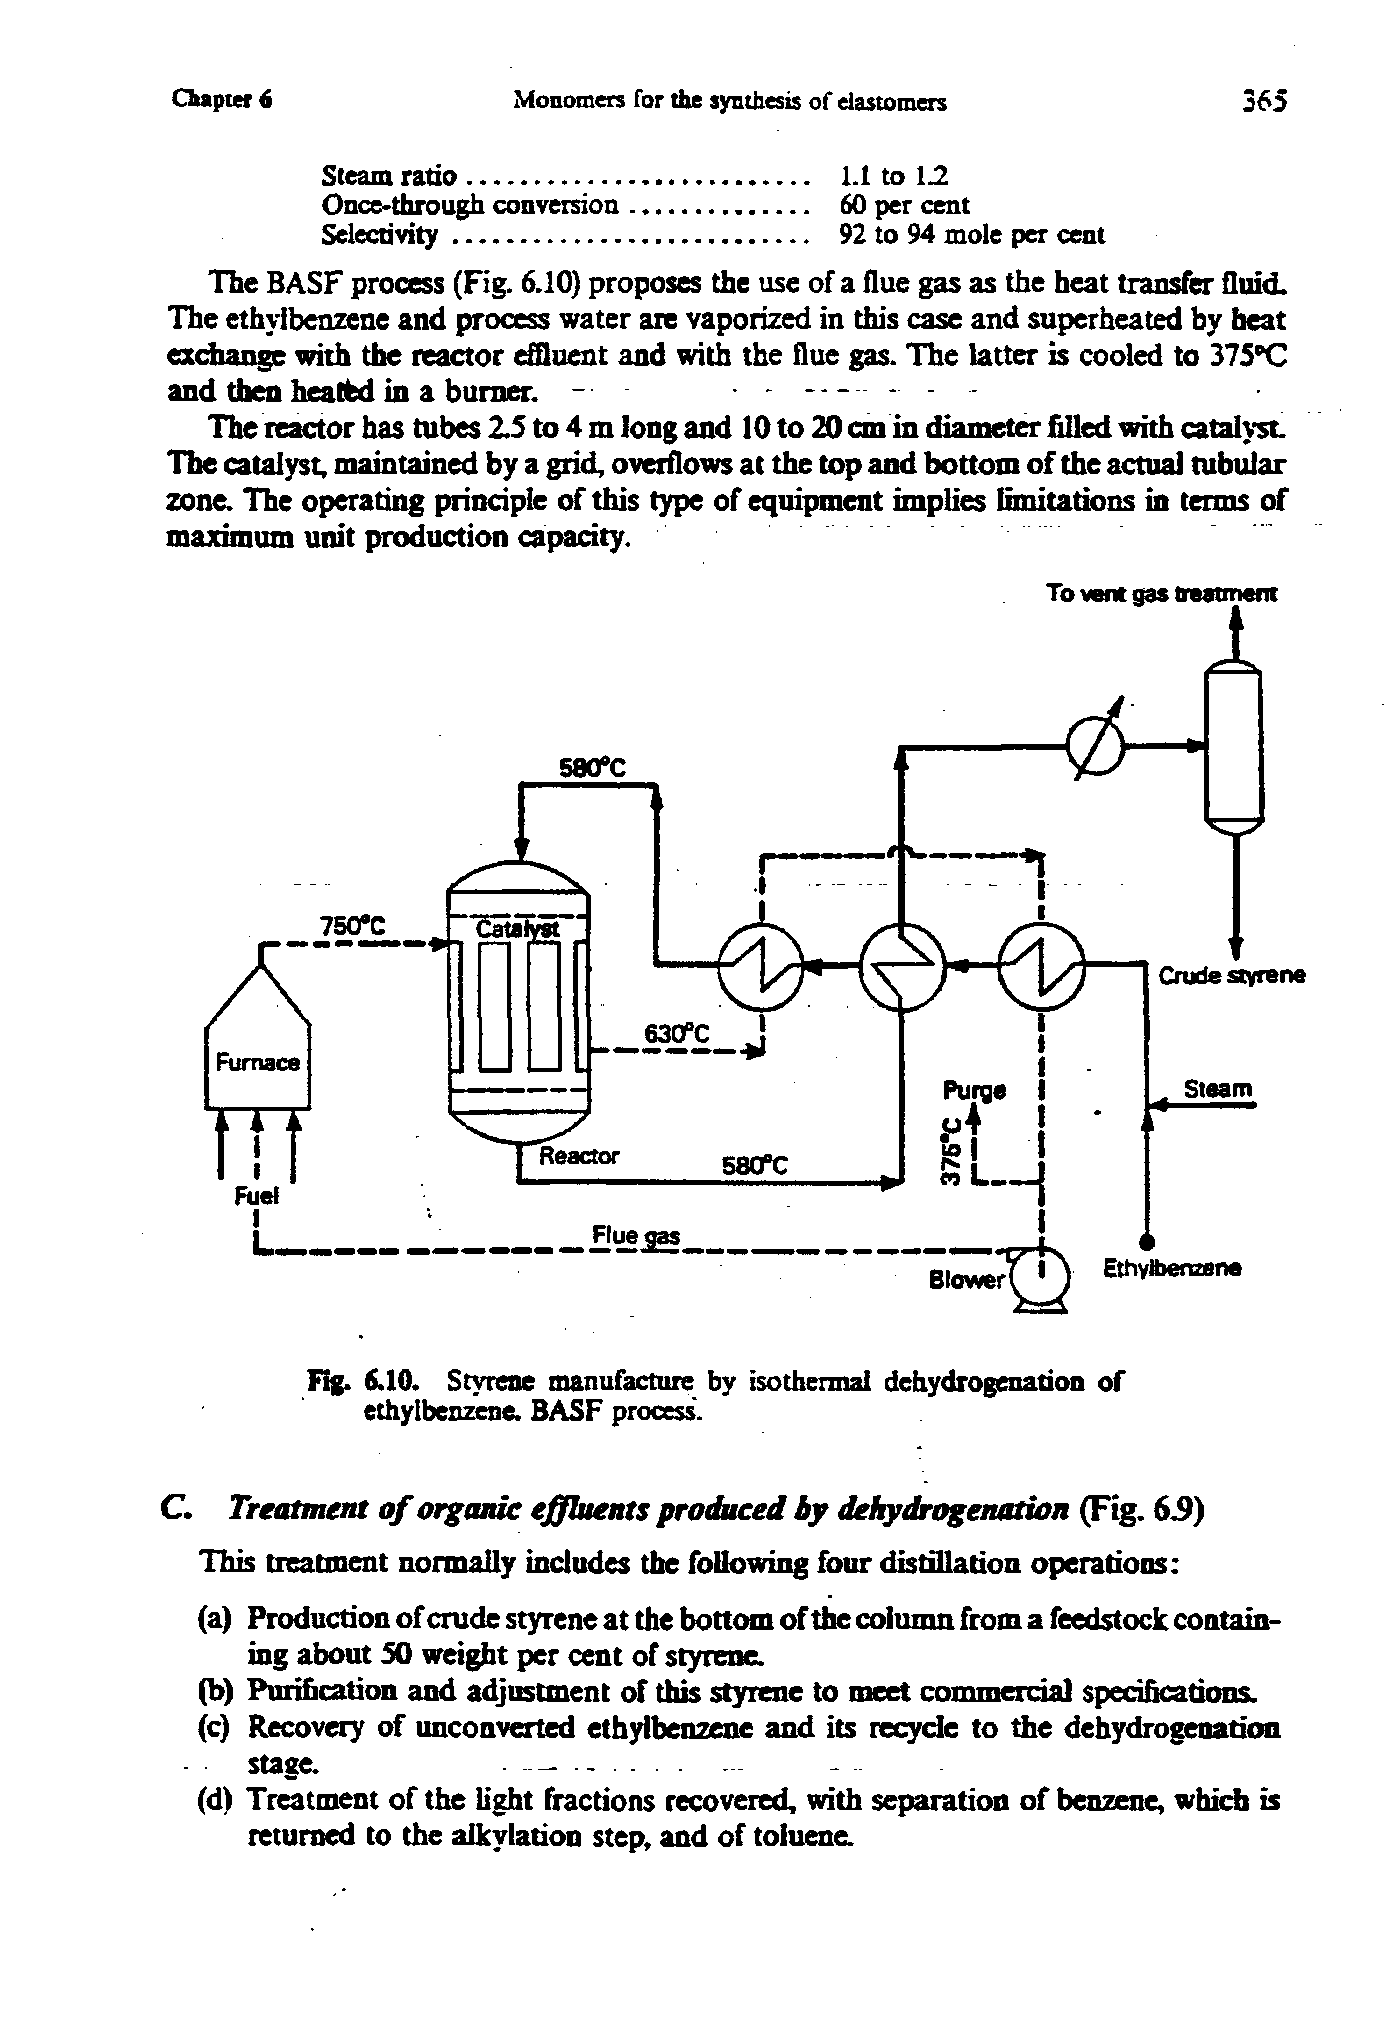 Fig. 6.10. Styrene manufacture by isothermal dehydrogenation of ethylbenzene. BASF process.